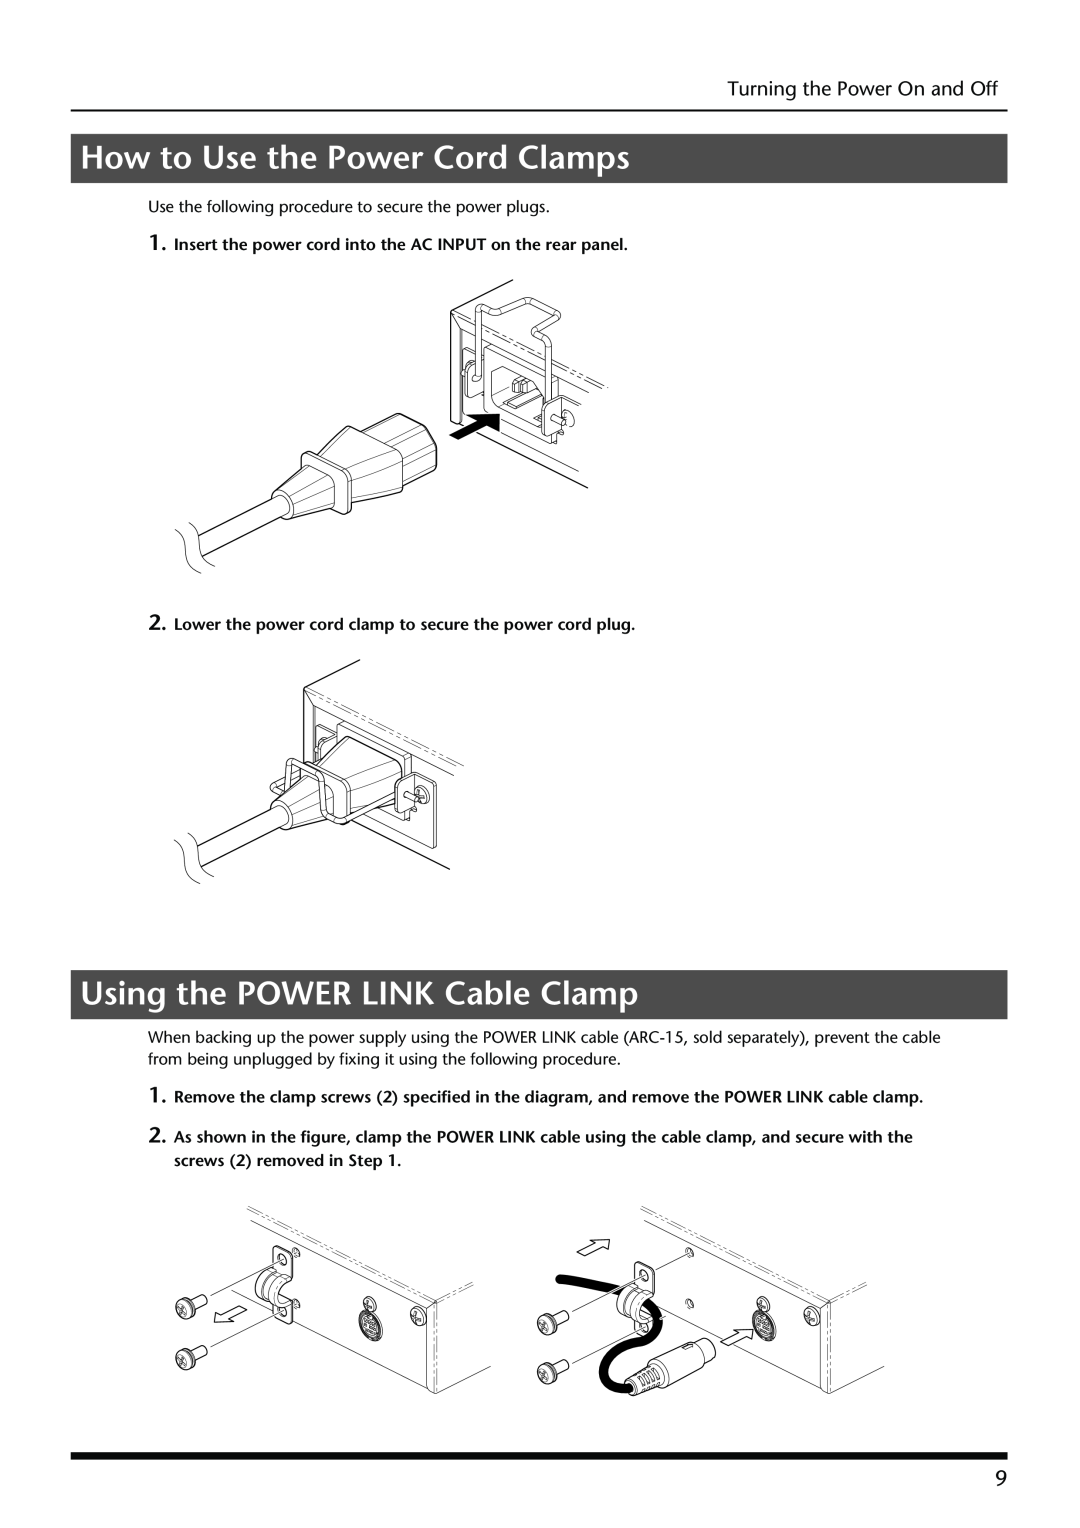 Roland S-OPT owner manual How to Use the Power Cord Clamps, Using the POWER LINK Cable Clamp, Turning the Power On and Off 